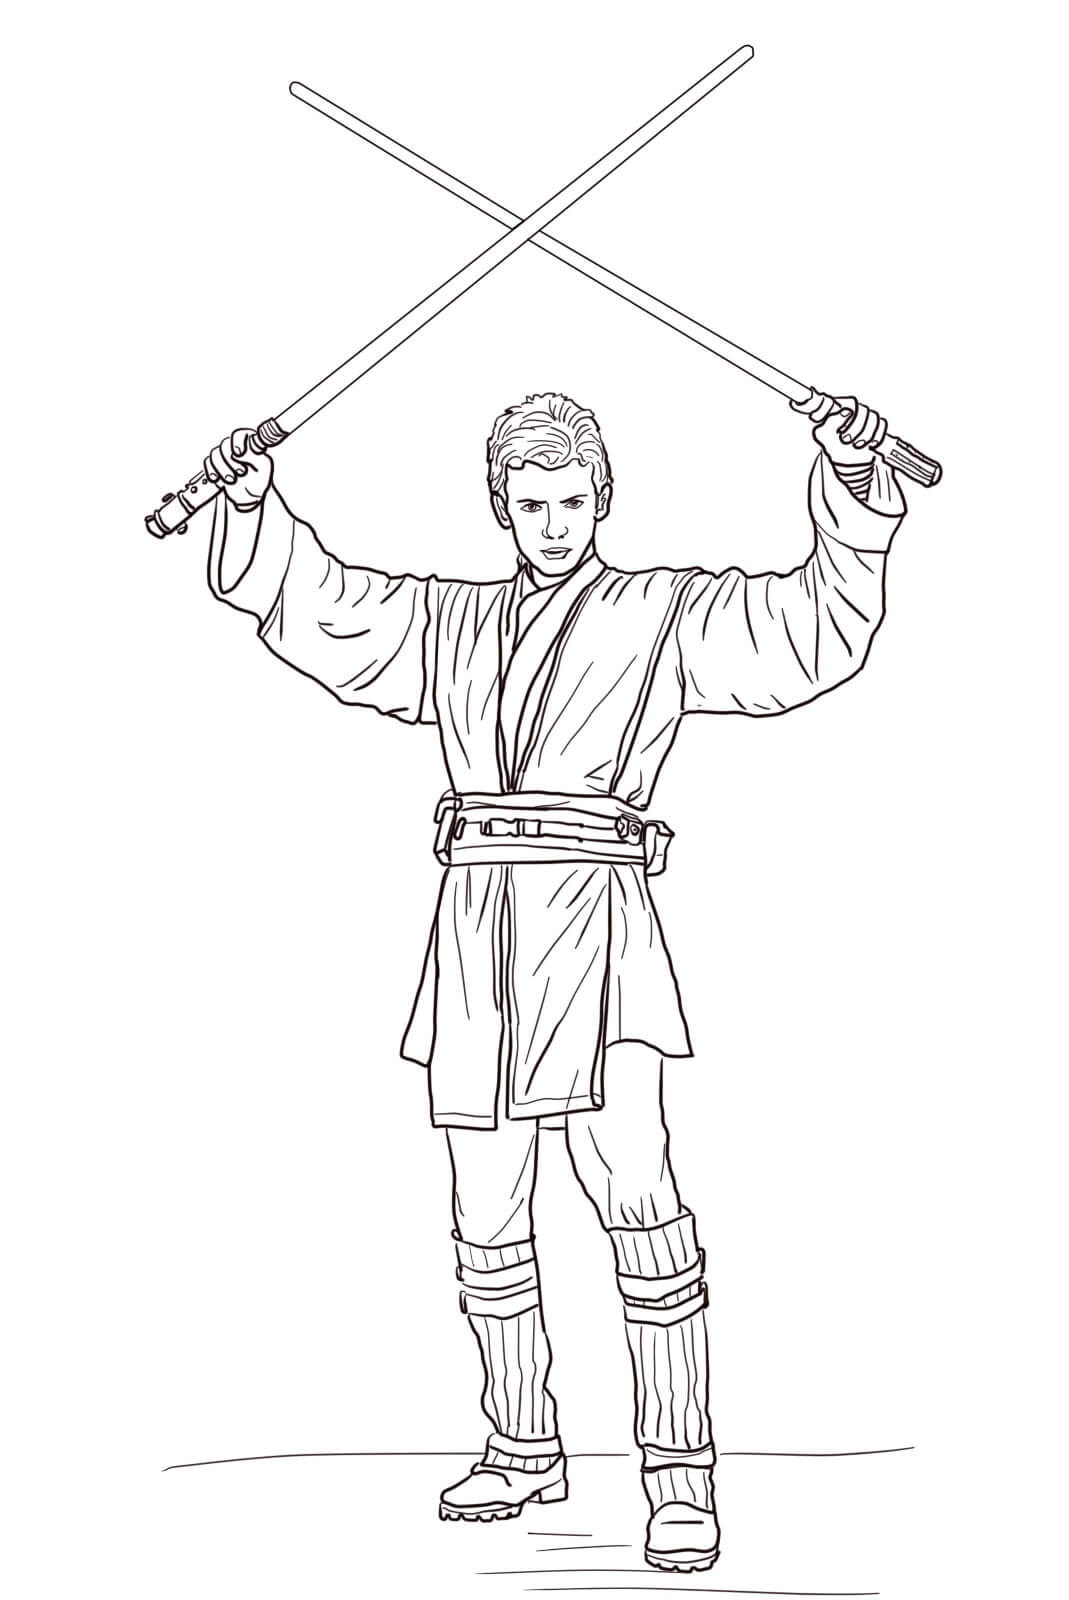 Anakin Skywalker With Lightsabers Star Wars Episode II Attack Of The Clones Coloring Page